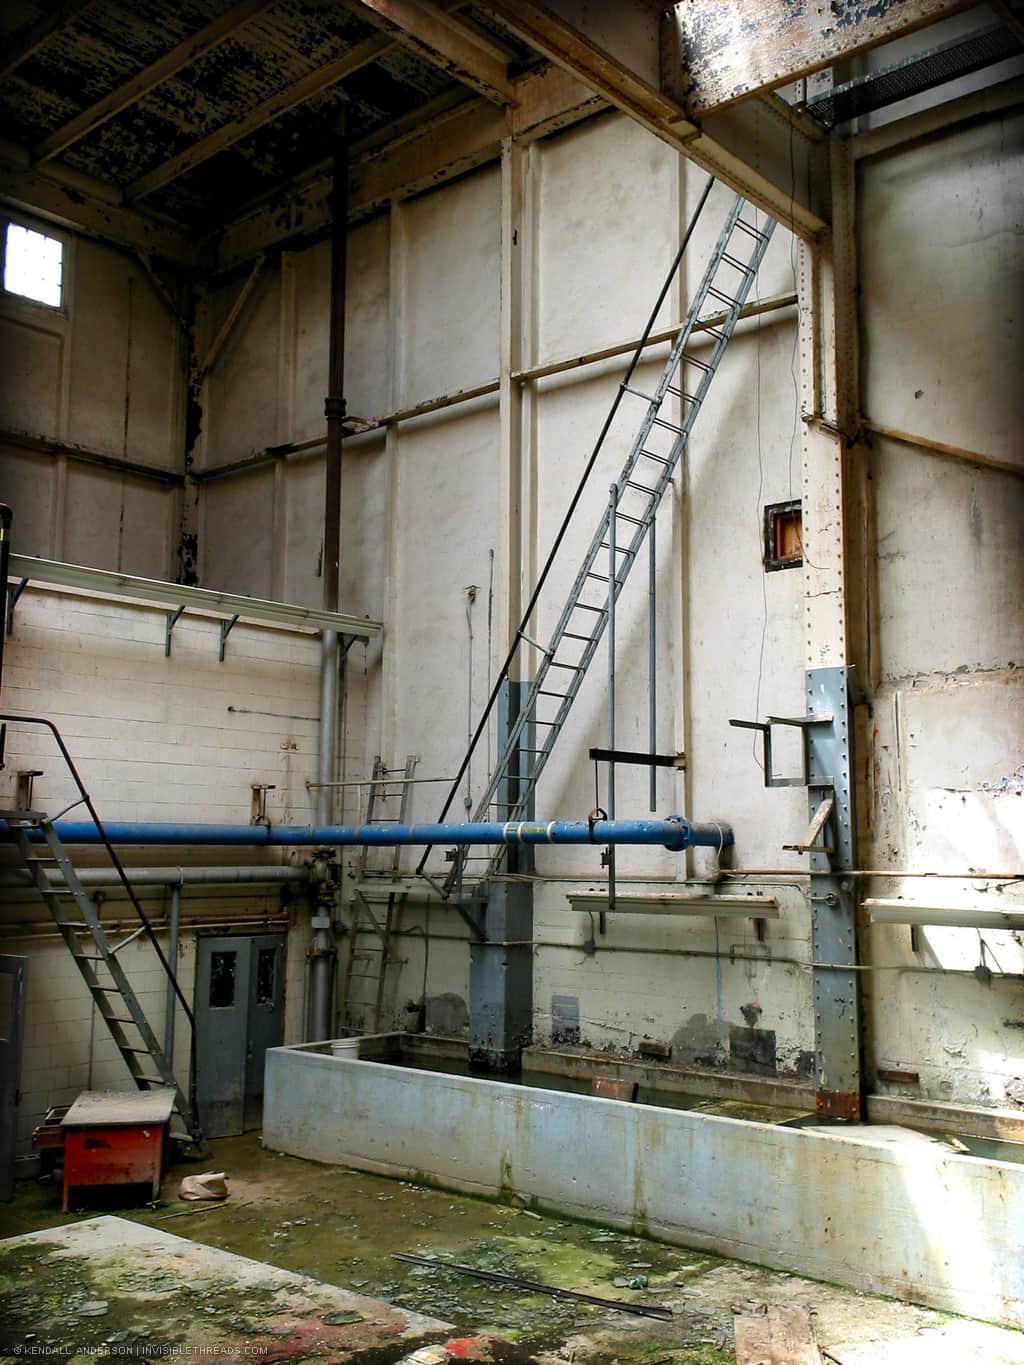 A steep narrow ladder extends from the ground floor up 3 storeys into the attic, with bars instead of stairs, and a minimal railing, inside a mechanical room.